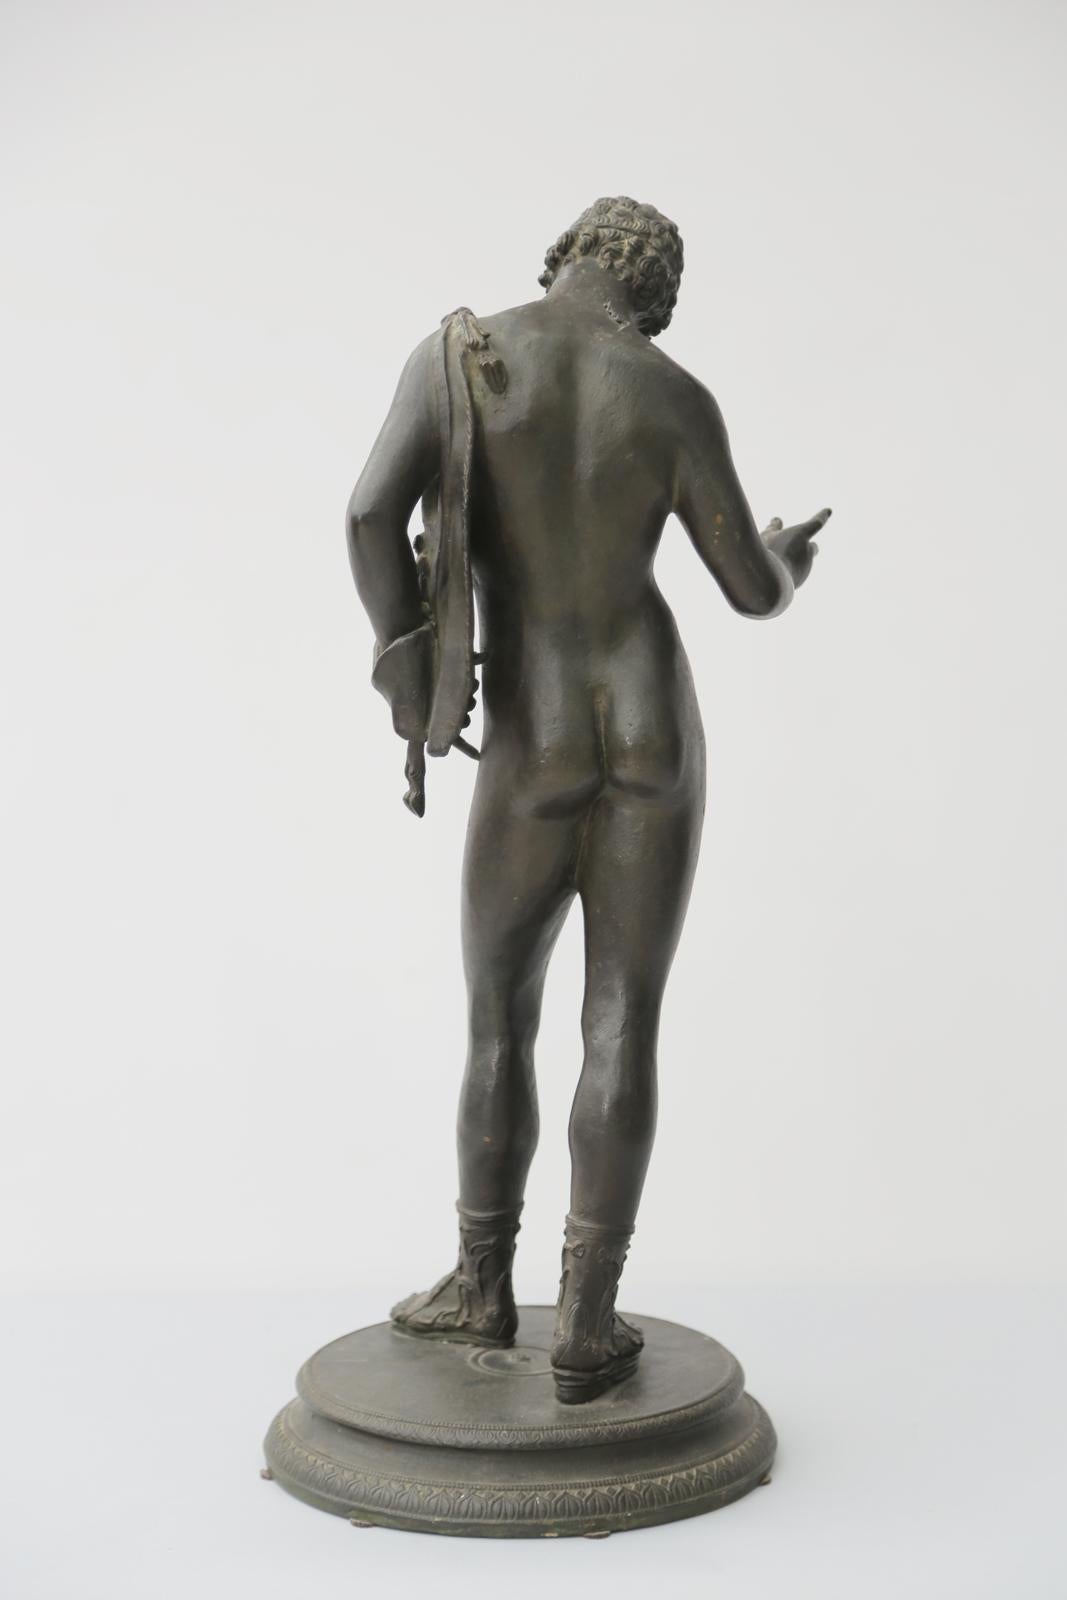 An Italian 19th-century Grand Tour Greco Roman bronze sculpture of Narcissus, after the original sculpture excavated in 1862 at Pompeii, the green patinated bronze figure of the mythological son of the river god Cephissus and the nymph Liriope;